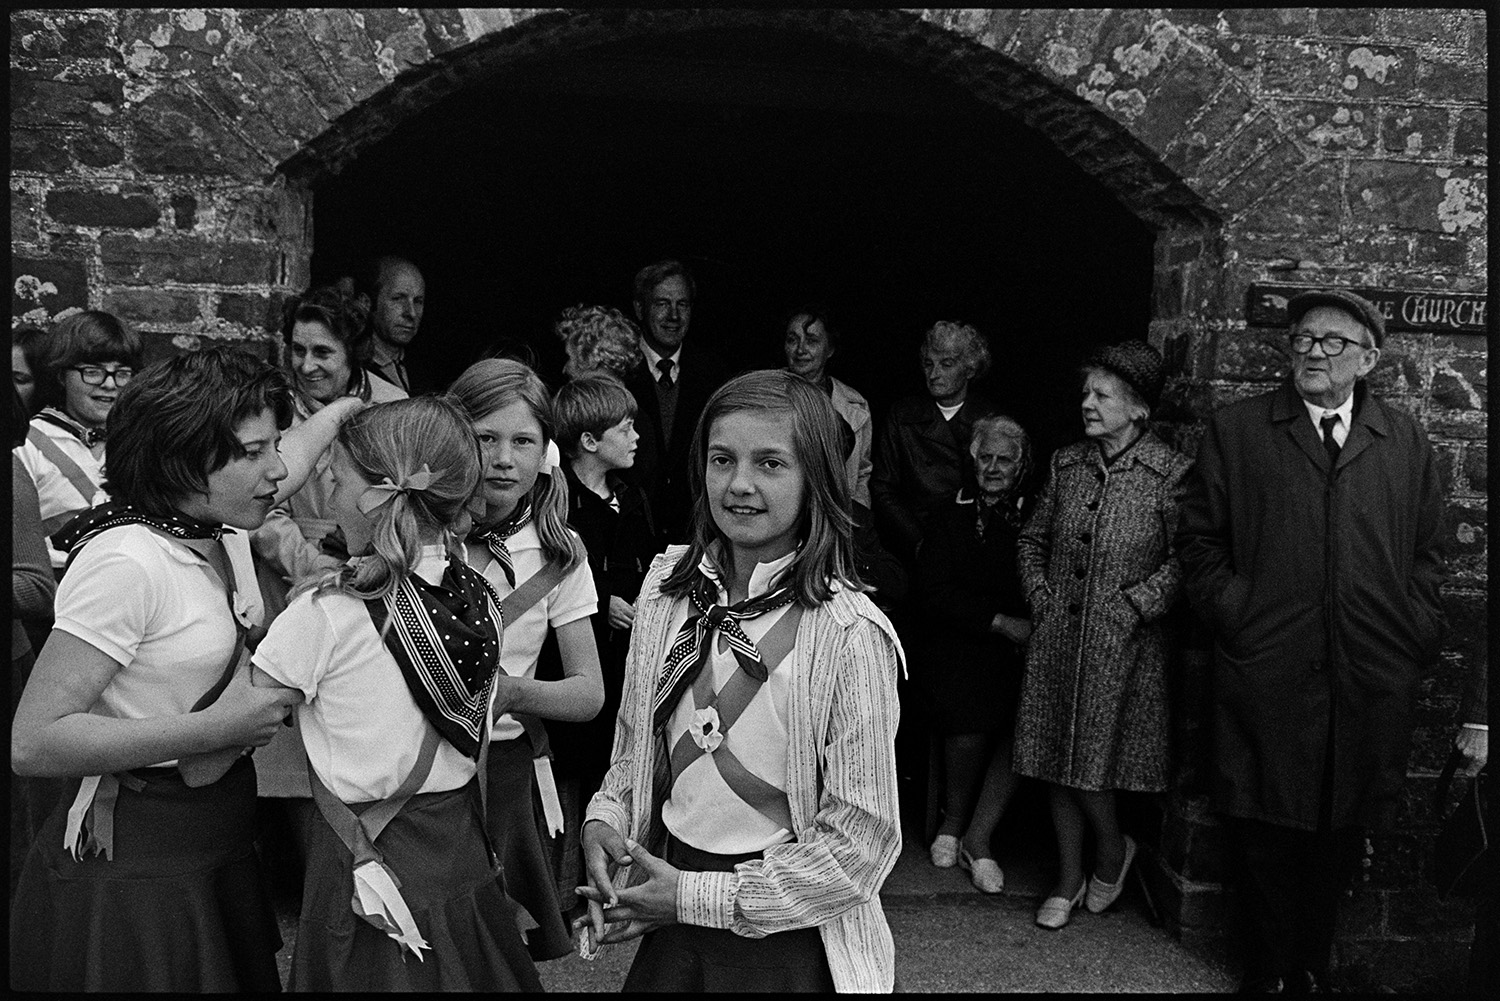 Children Morris dancing in village street. 
[Child Morris Dancers waiting to perform at High Bickington Primary School in the celebrations for the Silver Jubilee of Queen Elizabeth II. Men and women are stood under a stone archway watching them.]